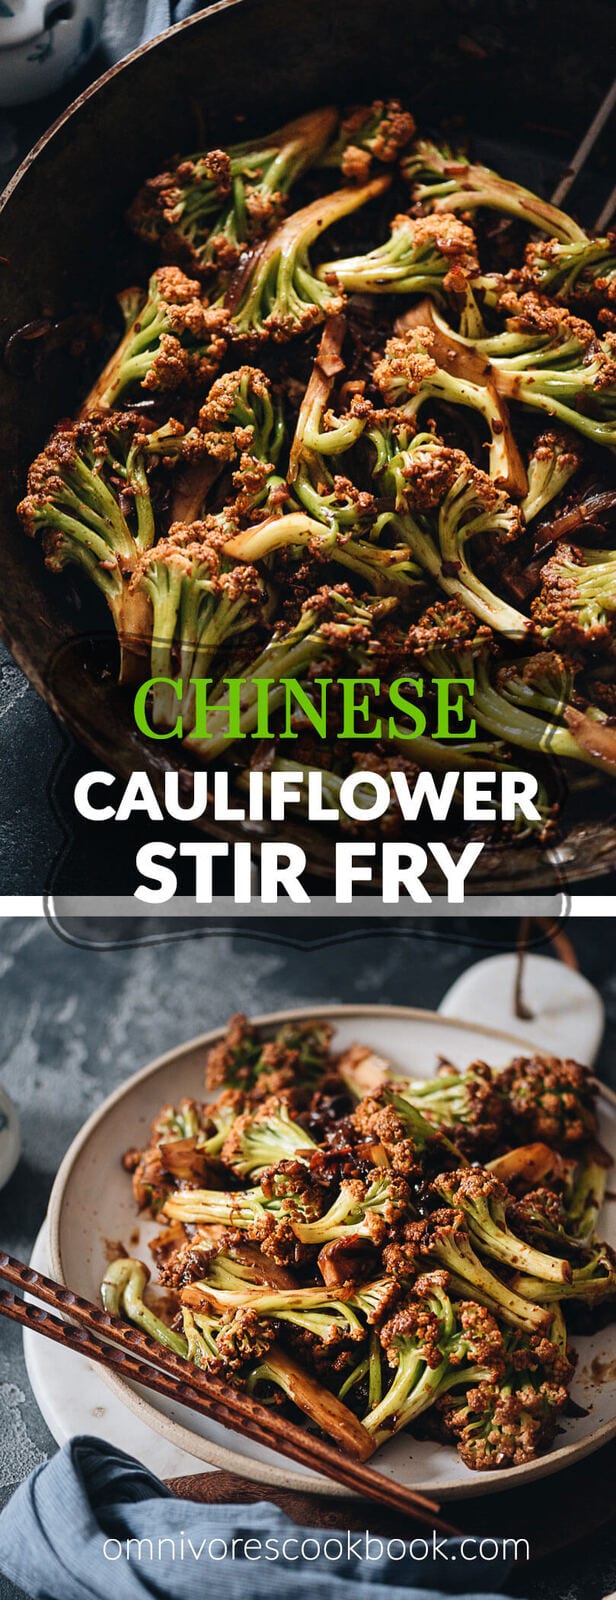 Chinese Cauliflower Stir Fry (干锅菜花) - These crunchy cauliflower bites are cooked in a numbing spicy sauce that is so rich. Even though this recipe is vegan, I’ve included notes on how to add different types of protein, to make a more substantial dish for your dinner. {Vegan, Gluten-Free Adaptable}